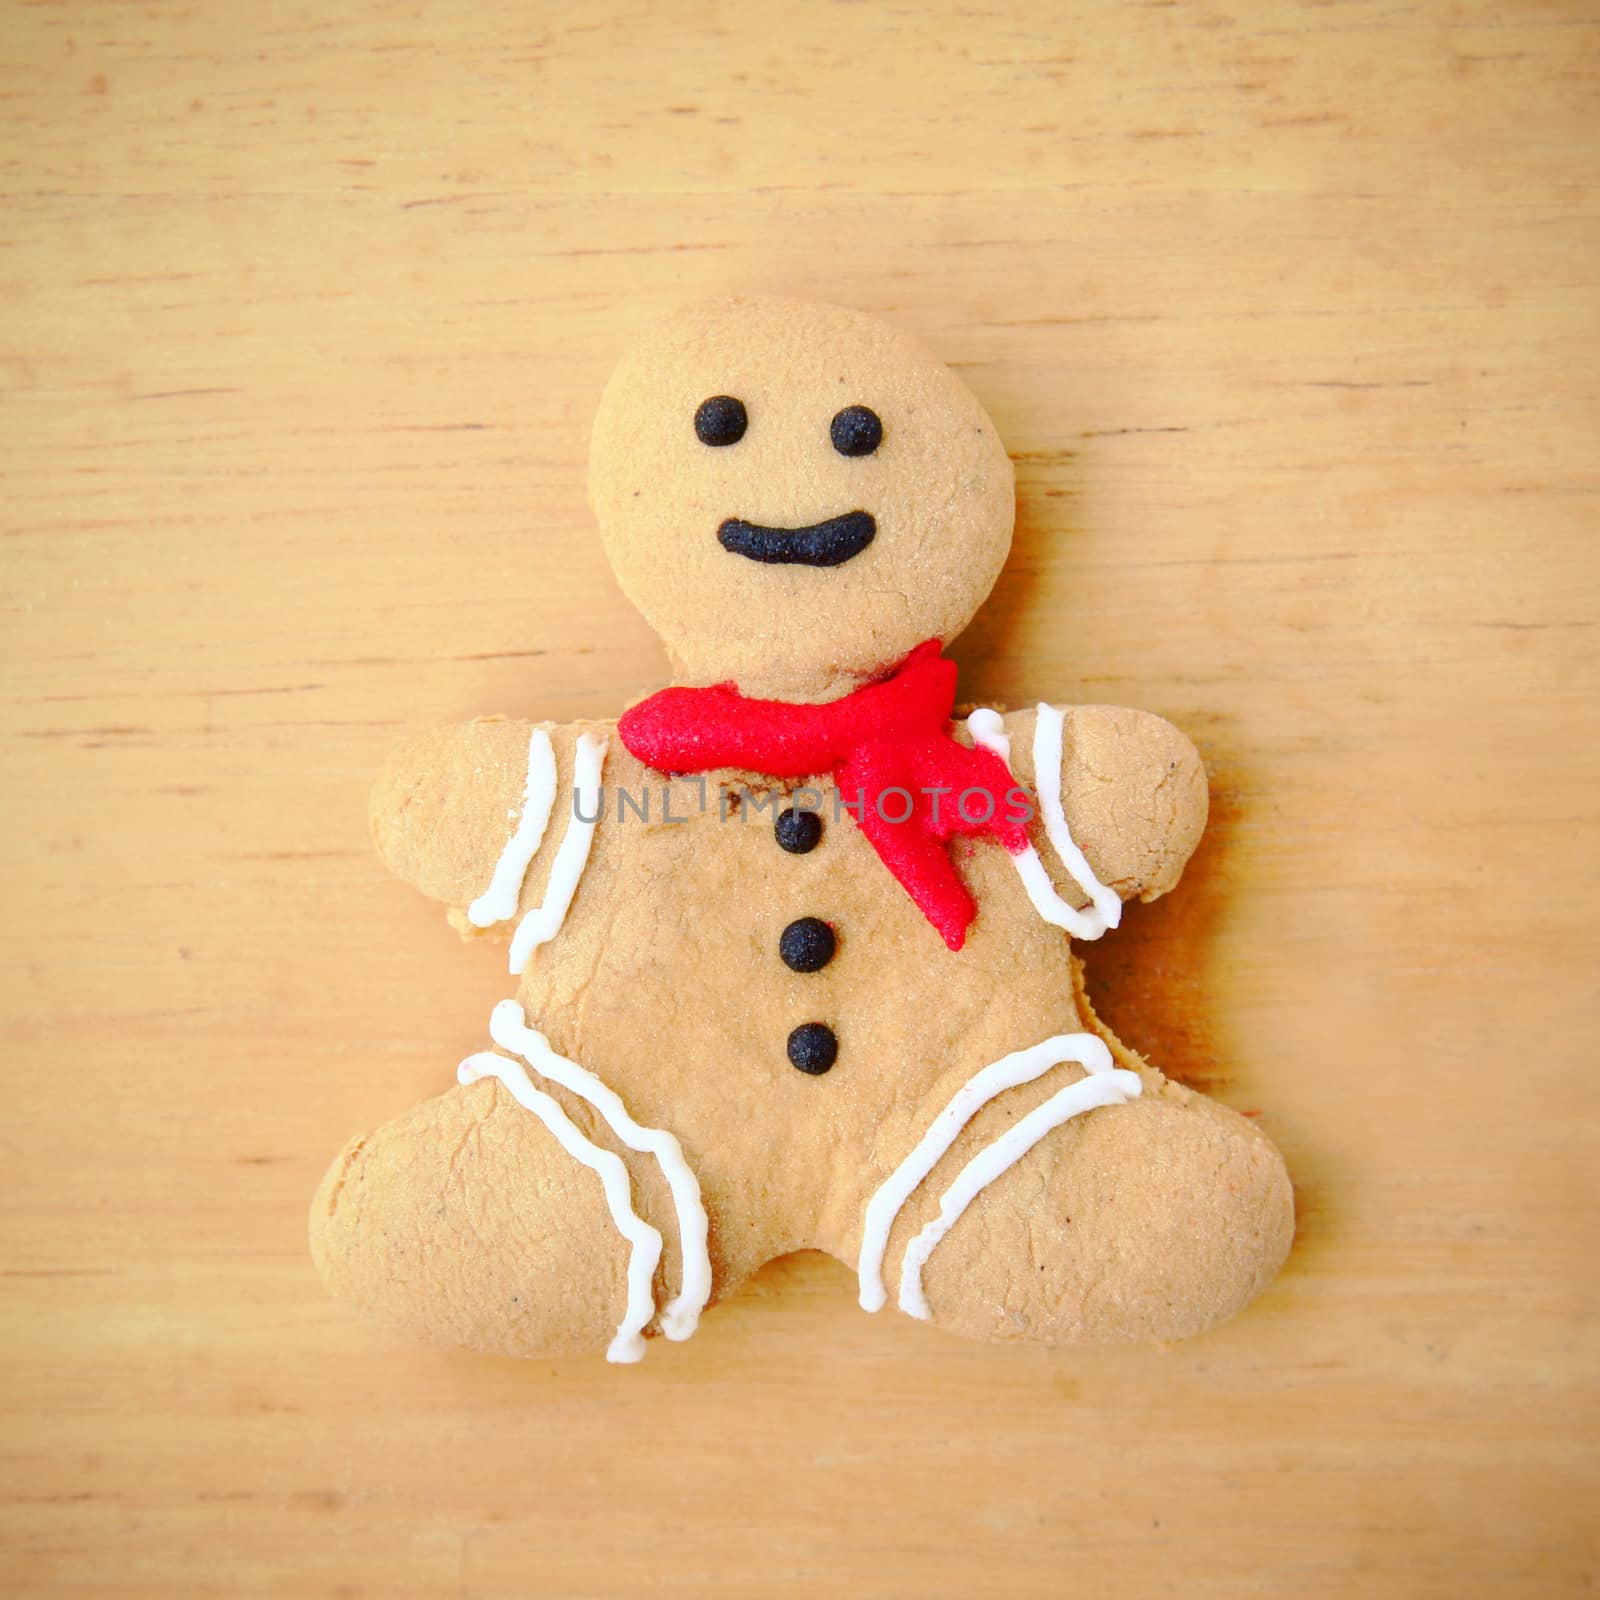 Gingerbread man with retro filter effect by nuchylee